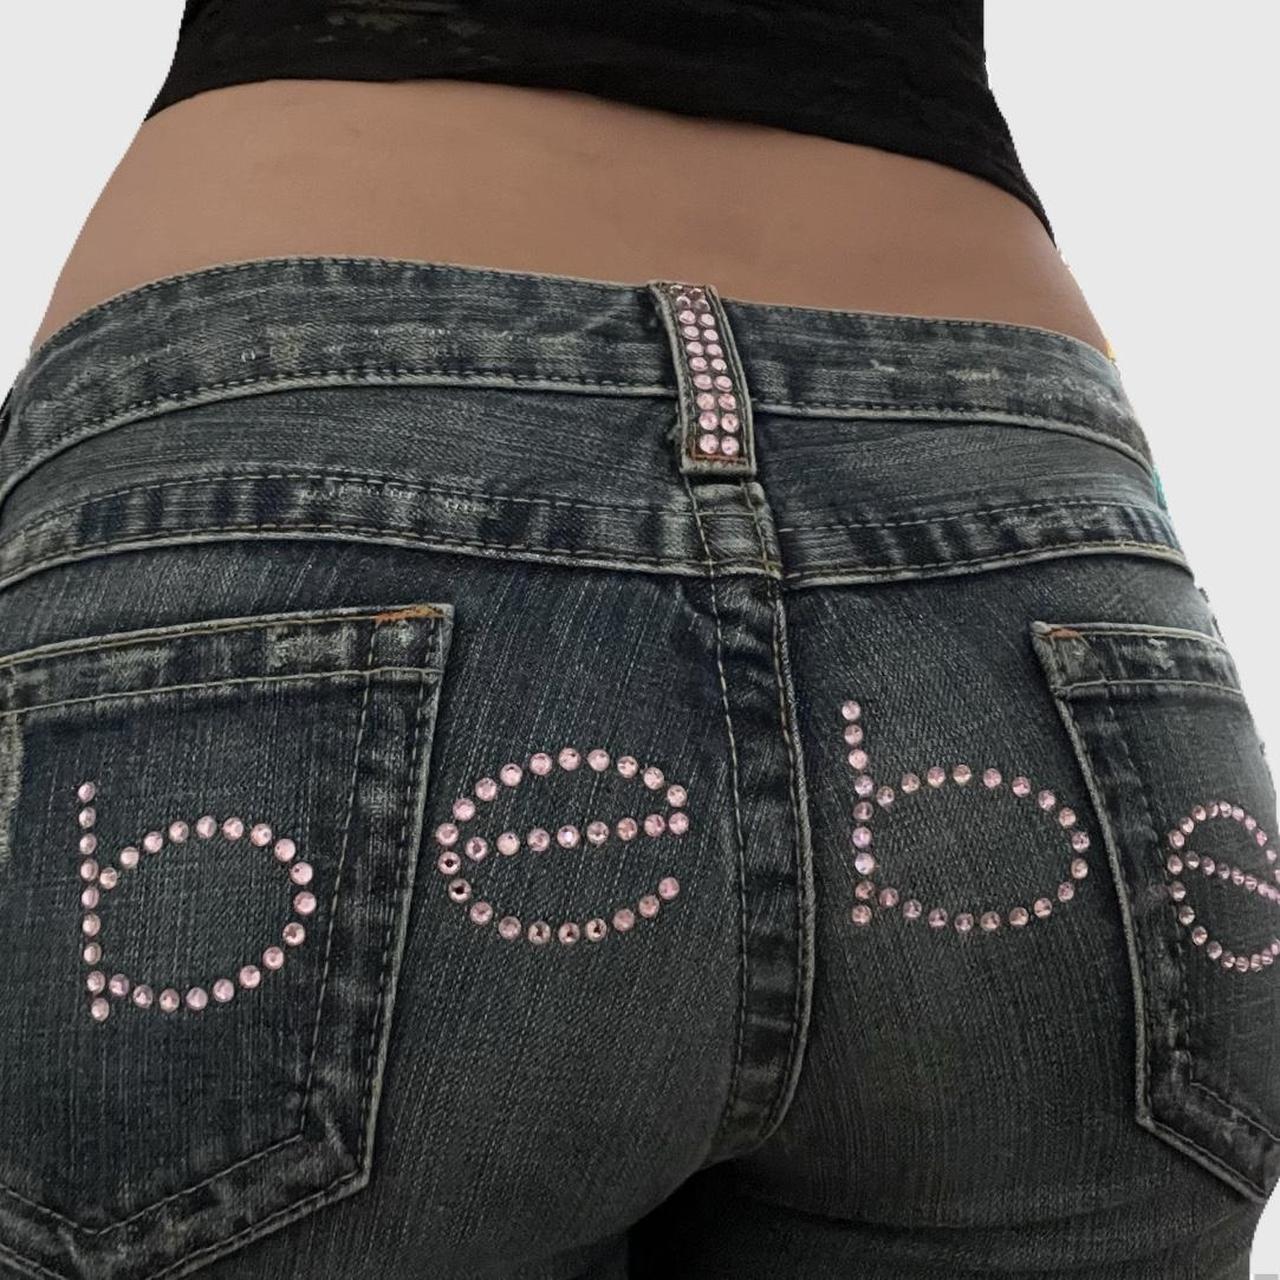 THE MOST PERFECT Y2K rhinestone bebe jeans 🌟🌟💗 low...